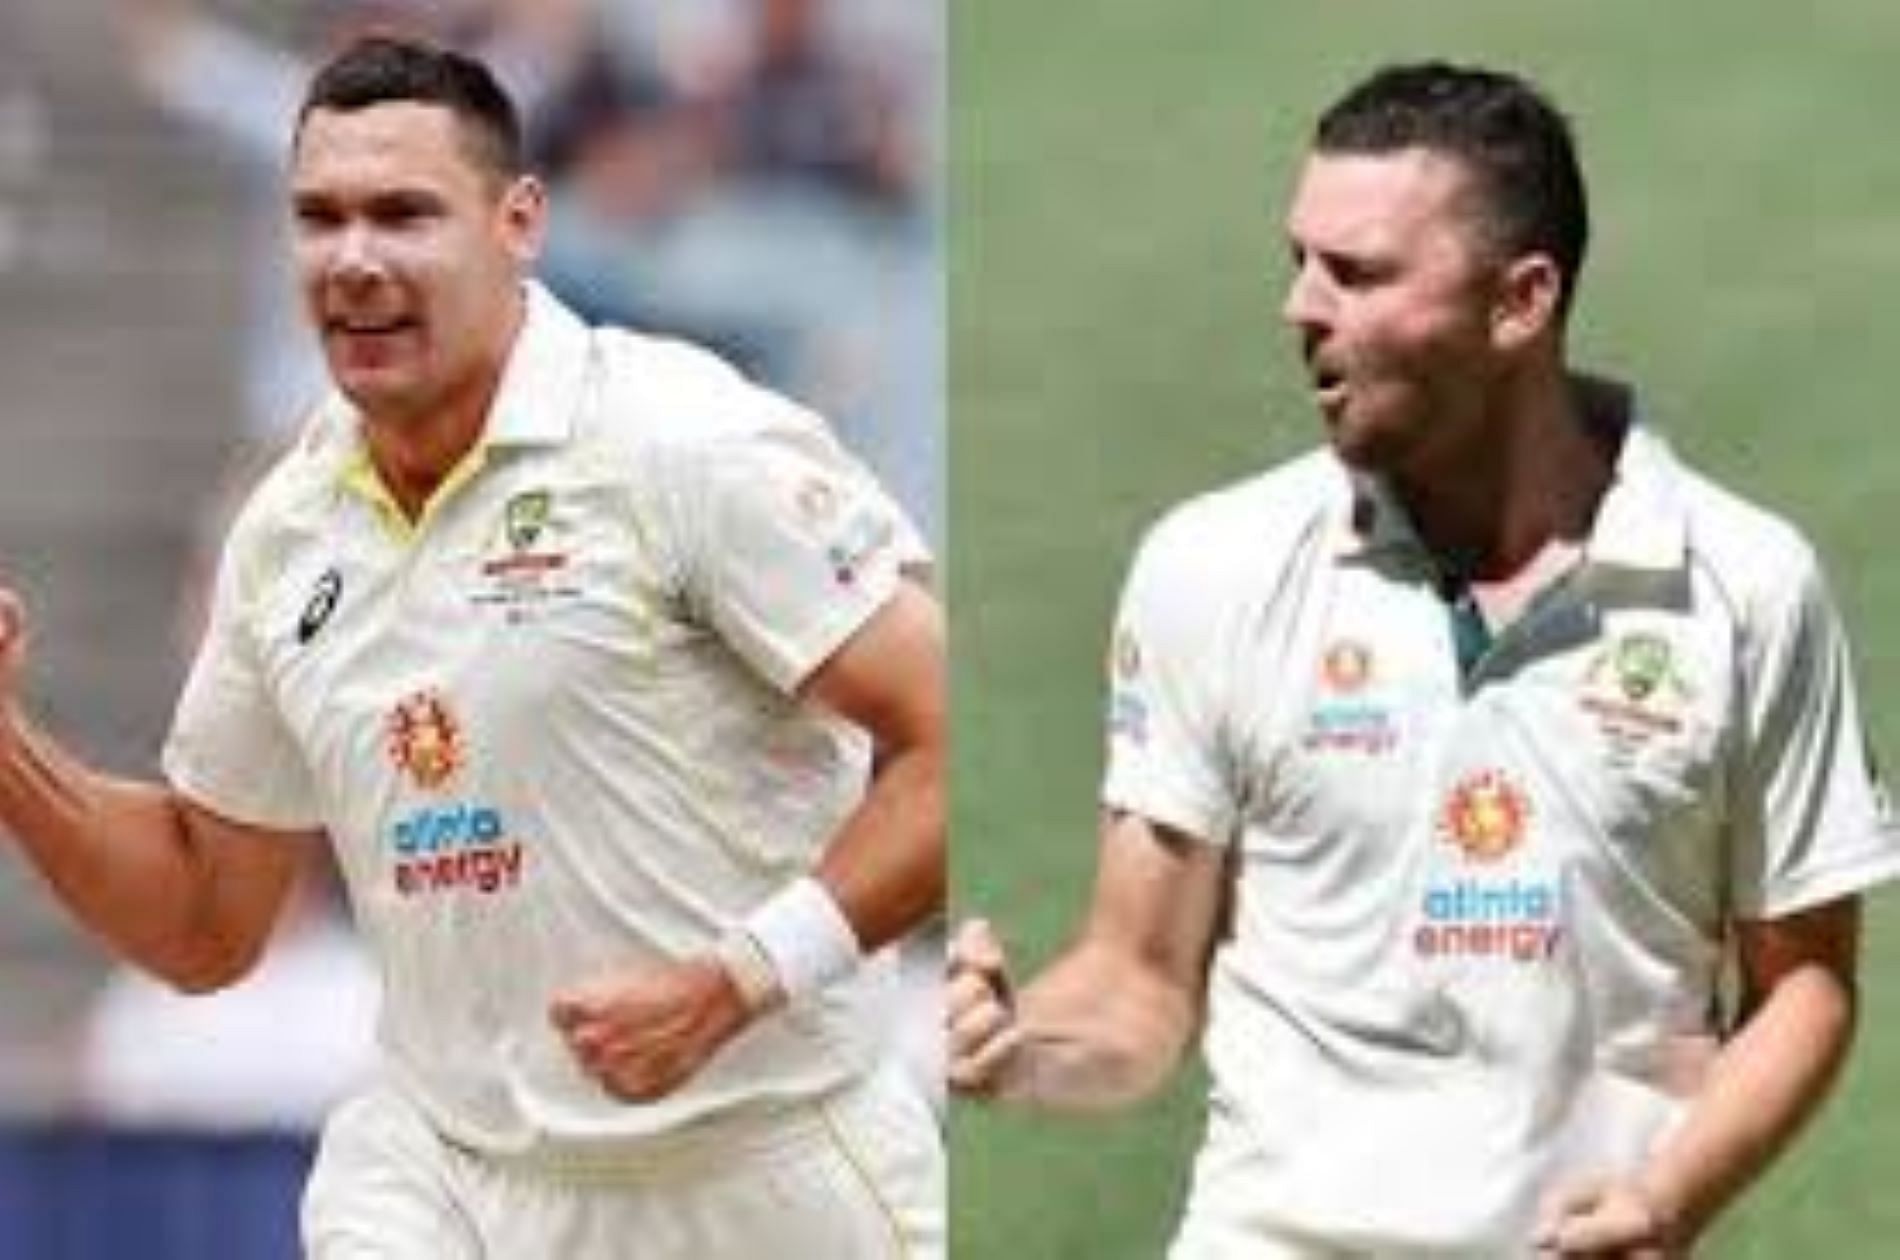 Australia may have to decide between Hazlewood and Boland as the third seamer for the fourth Test.